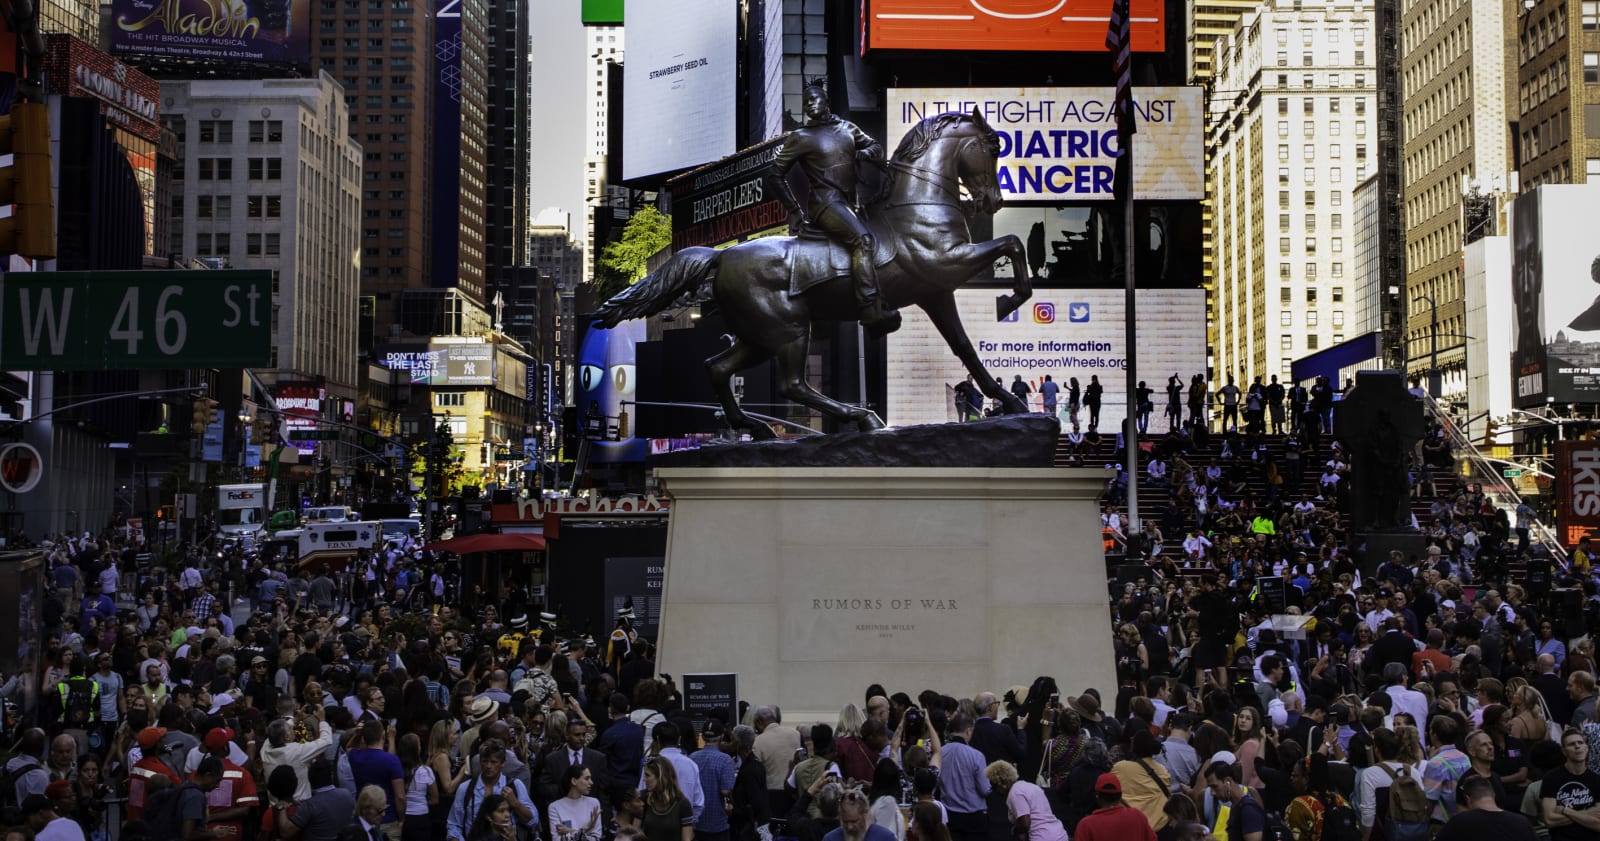 <p>Installation view: 'Rumors of War', Public Installation, Times Square, New York, NY (2019), now <span>permanently in the Collection of the Virginia Museum of Fine Arts, Richmond, VA</span></p>